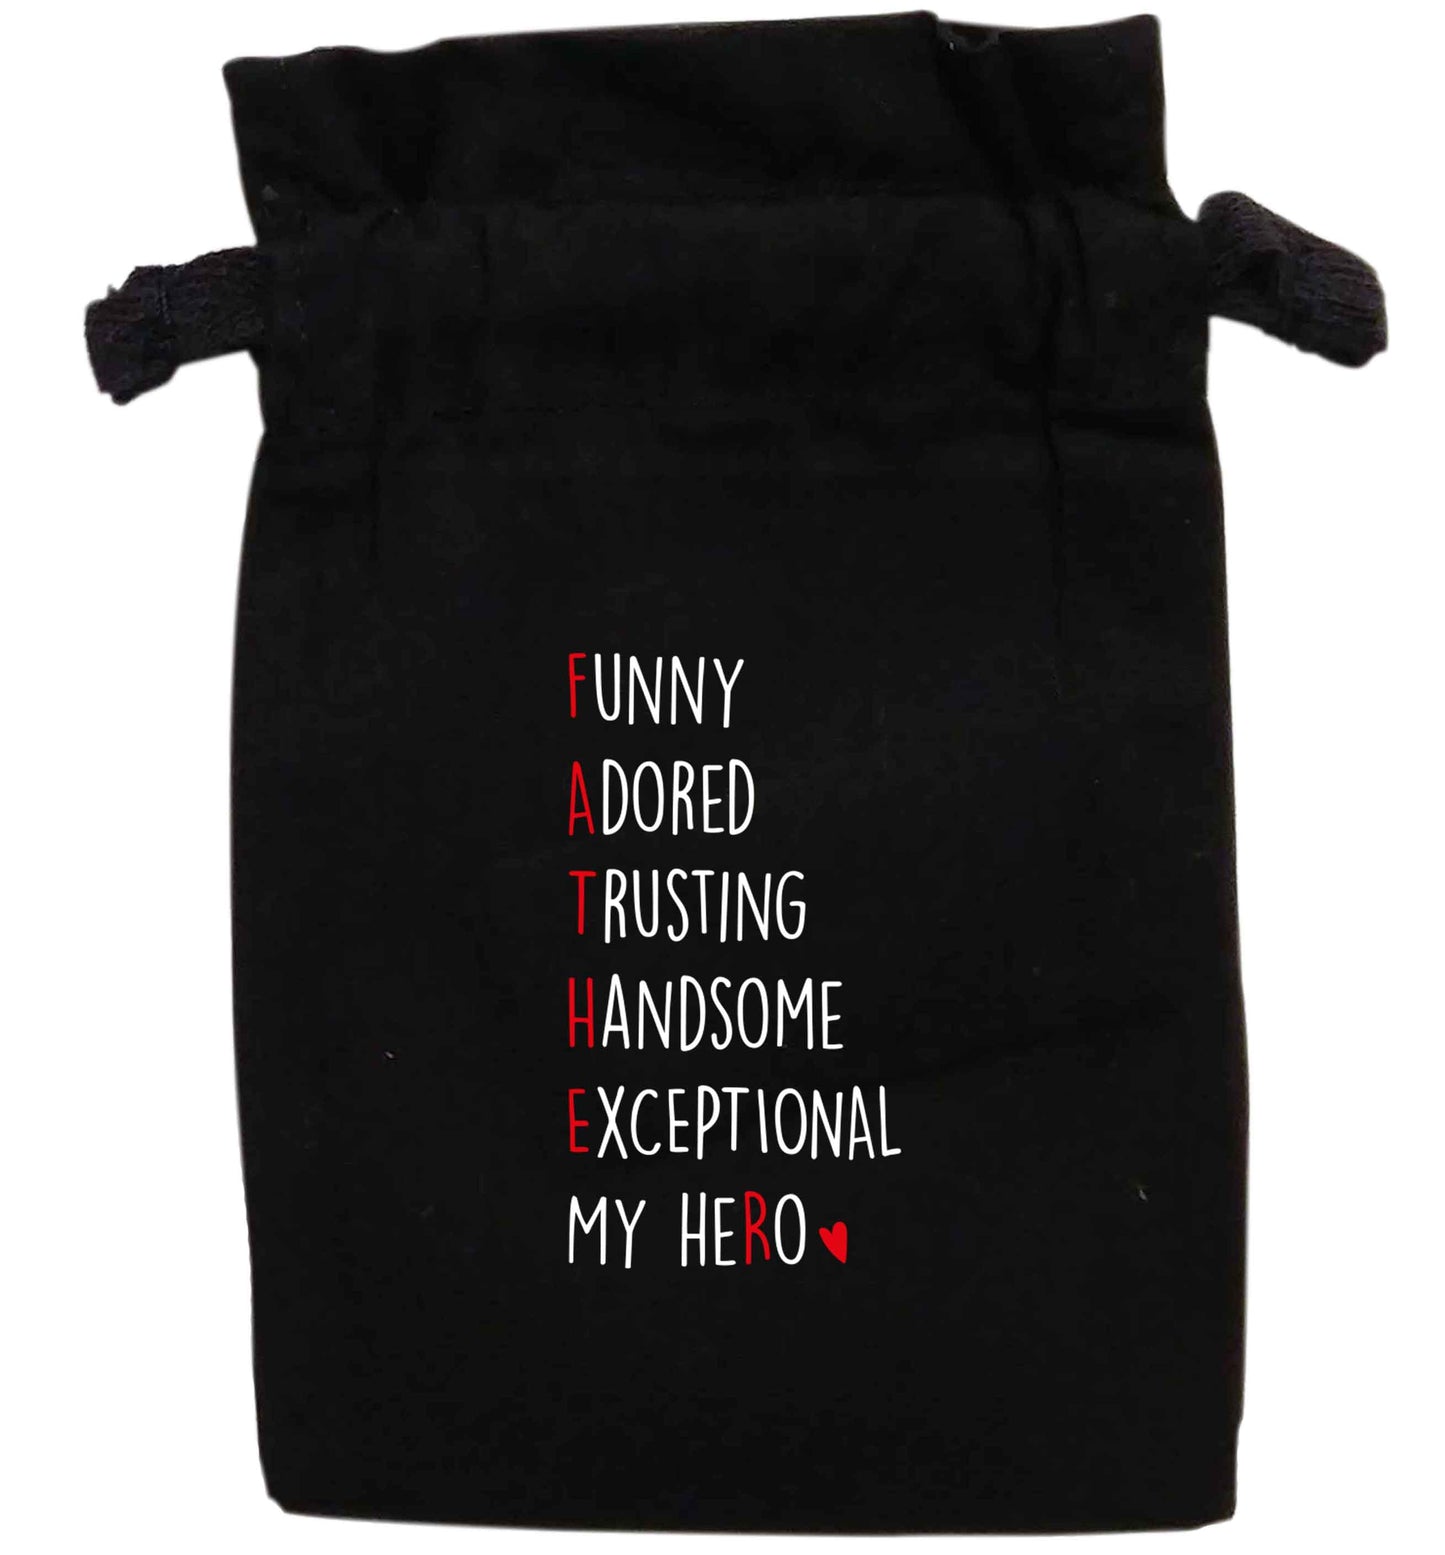 Father meaning hero acrostic poem | XS - L | Pouch / Drawstring bag / Sack | Organic Cotton | Bulk discounts available!